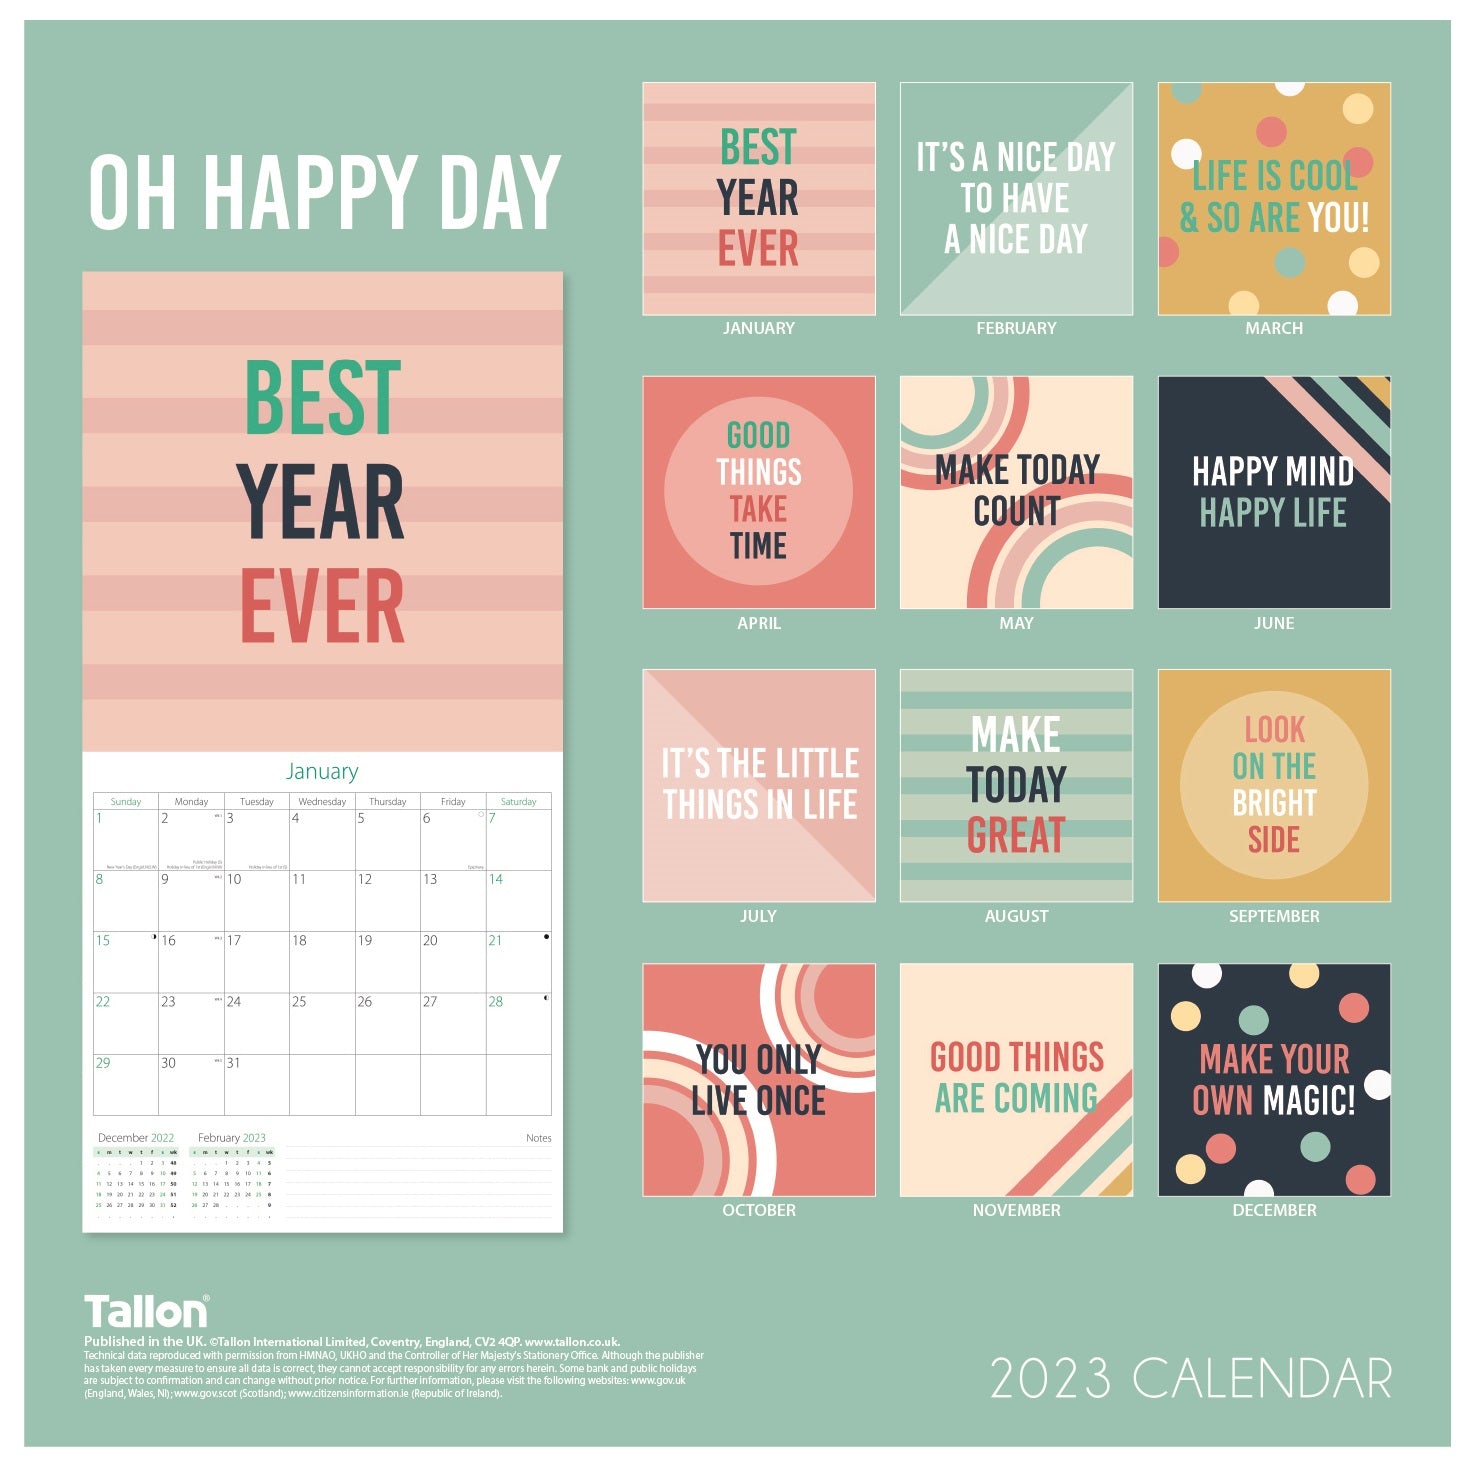 2024 Best Year Ever - Square Wall Calendar